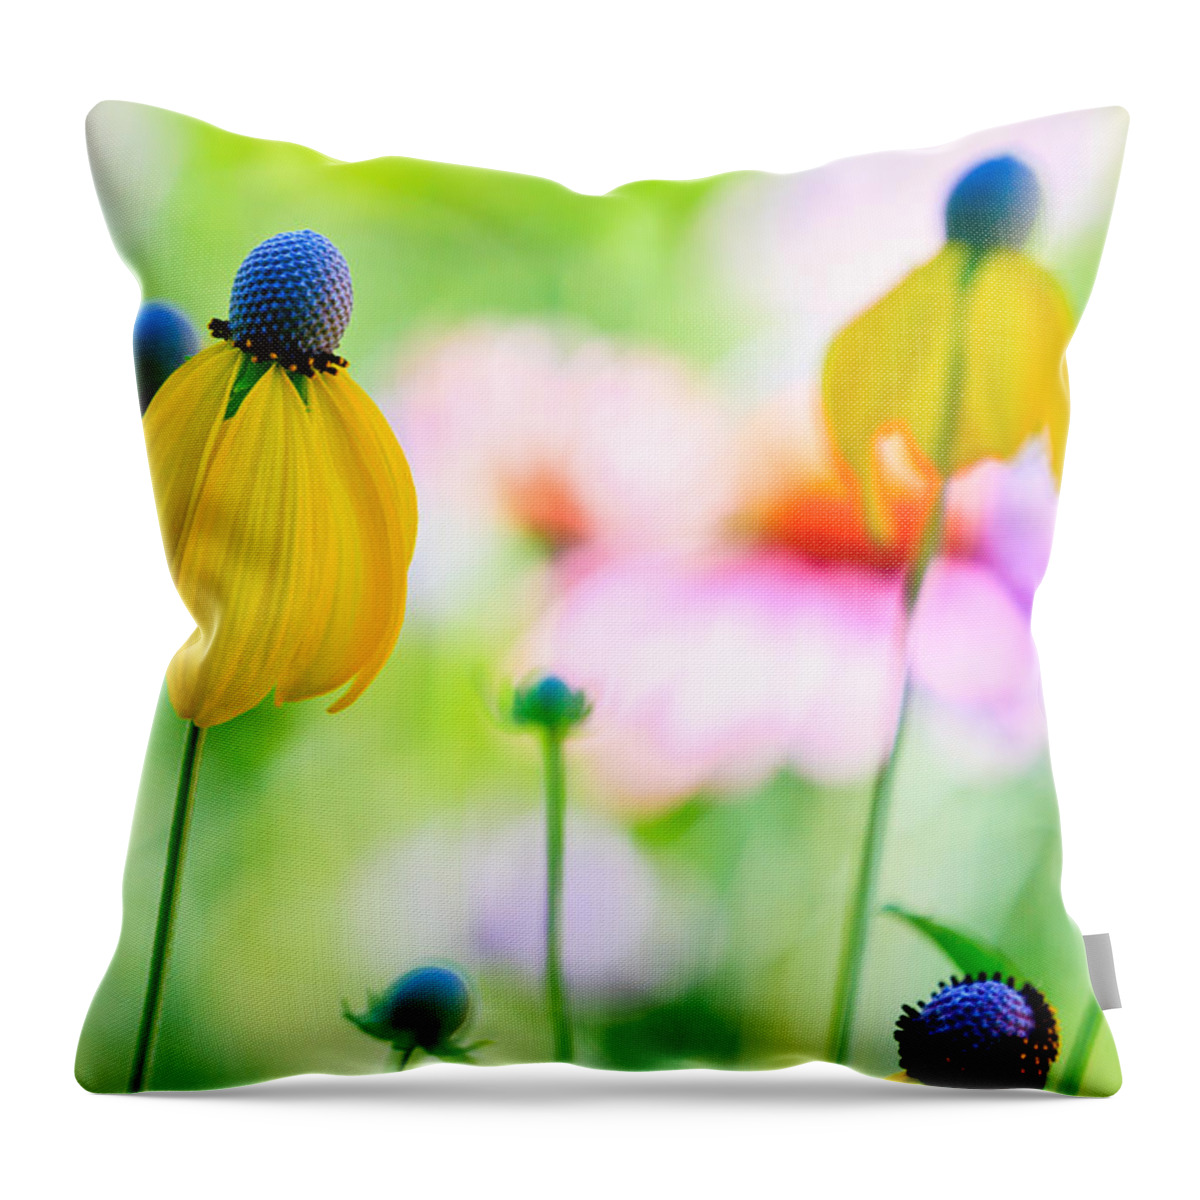 Flowers Throw Pillow featuring the photograph Wildflowers by Ben Graham